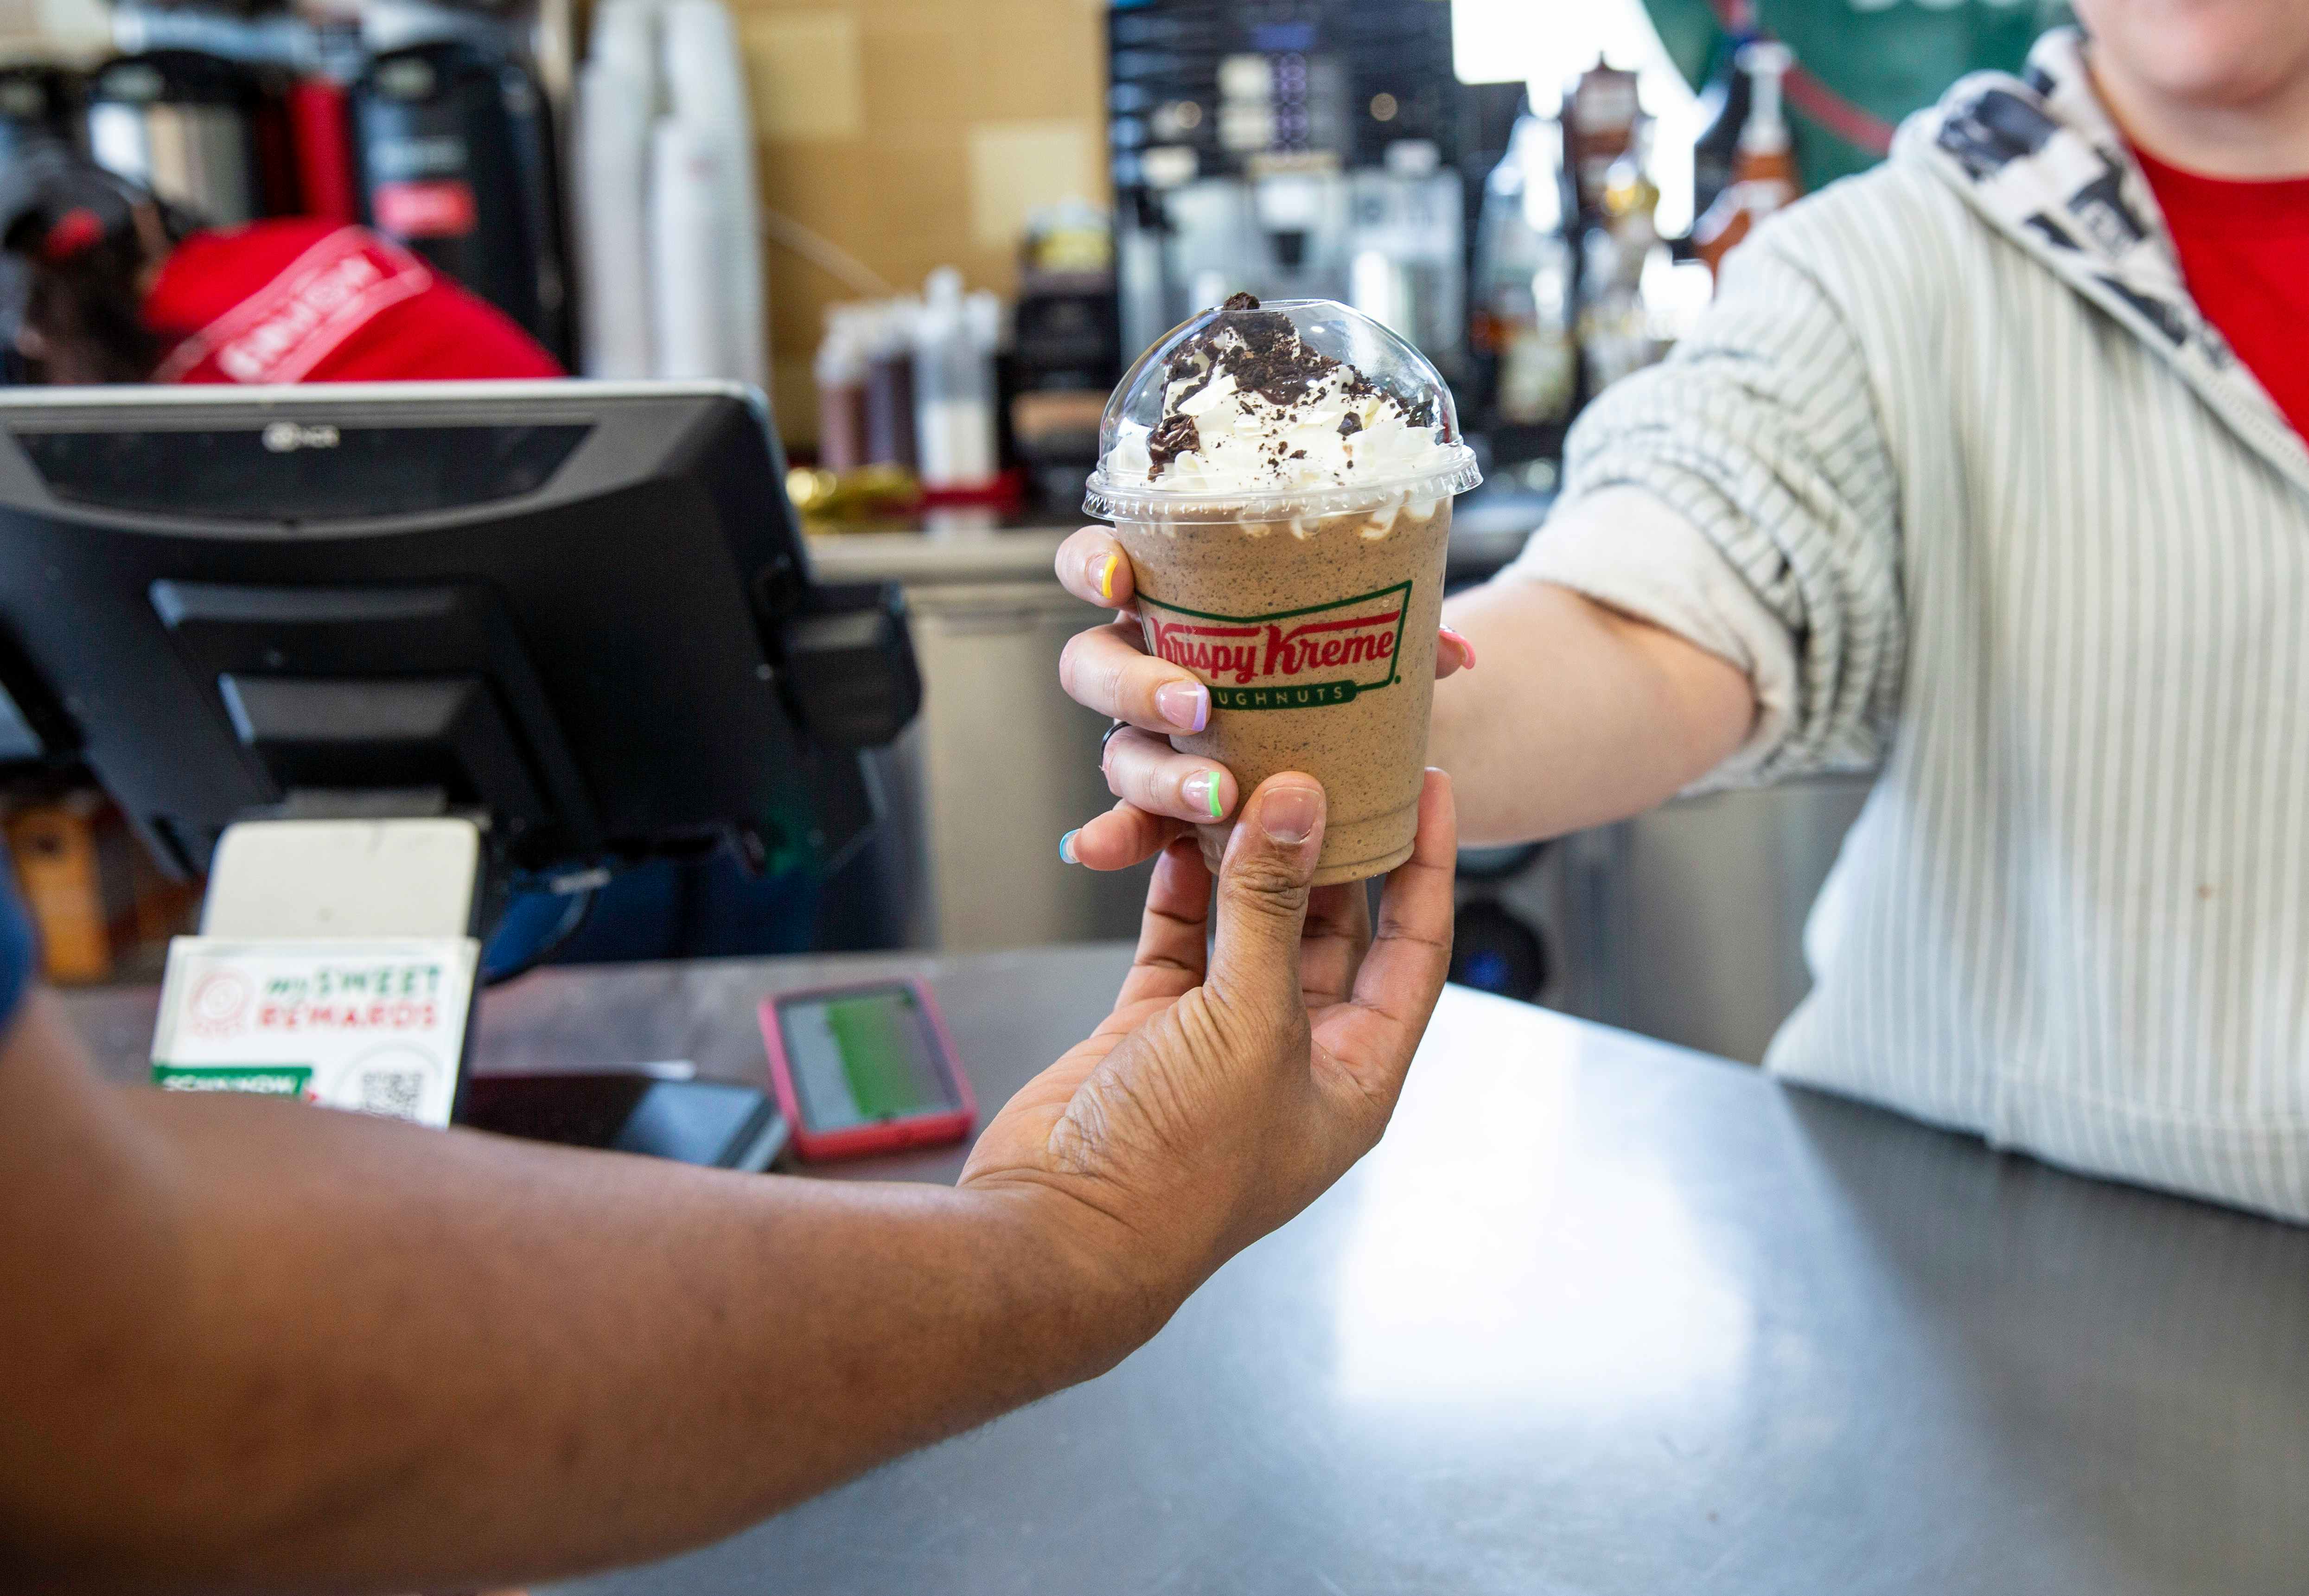 Employee handing over a limited edition oreo mocha latte to a customer